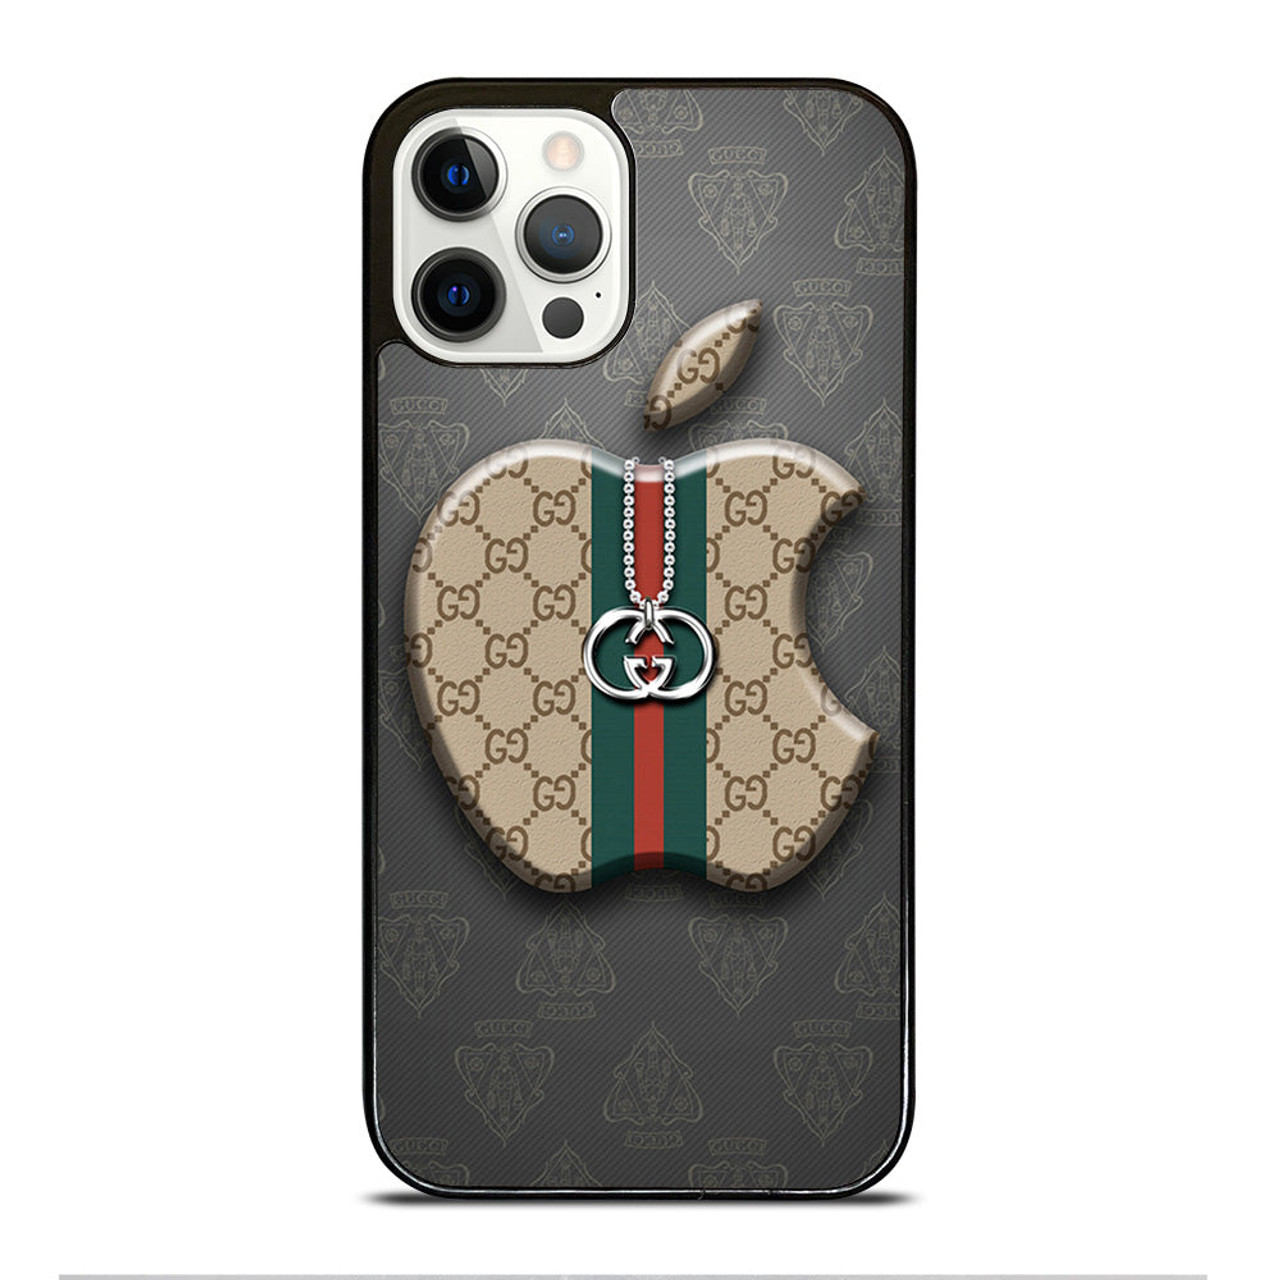 Brand new Gucci phone case Sizes iPhone 12 pro Max,iPhone 12 pro, original  iPhone 12 1for20 or 2 for 30 for Sale in March Air Reserve Base, CA -  OfferUp